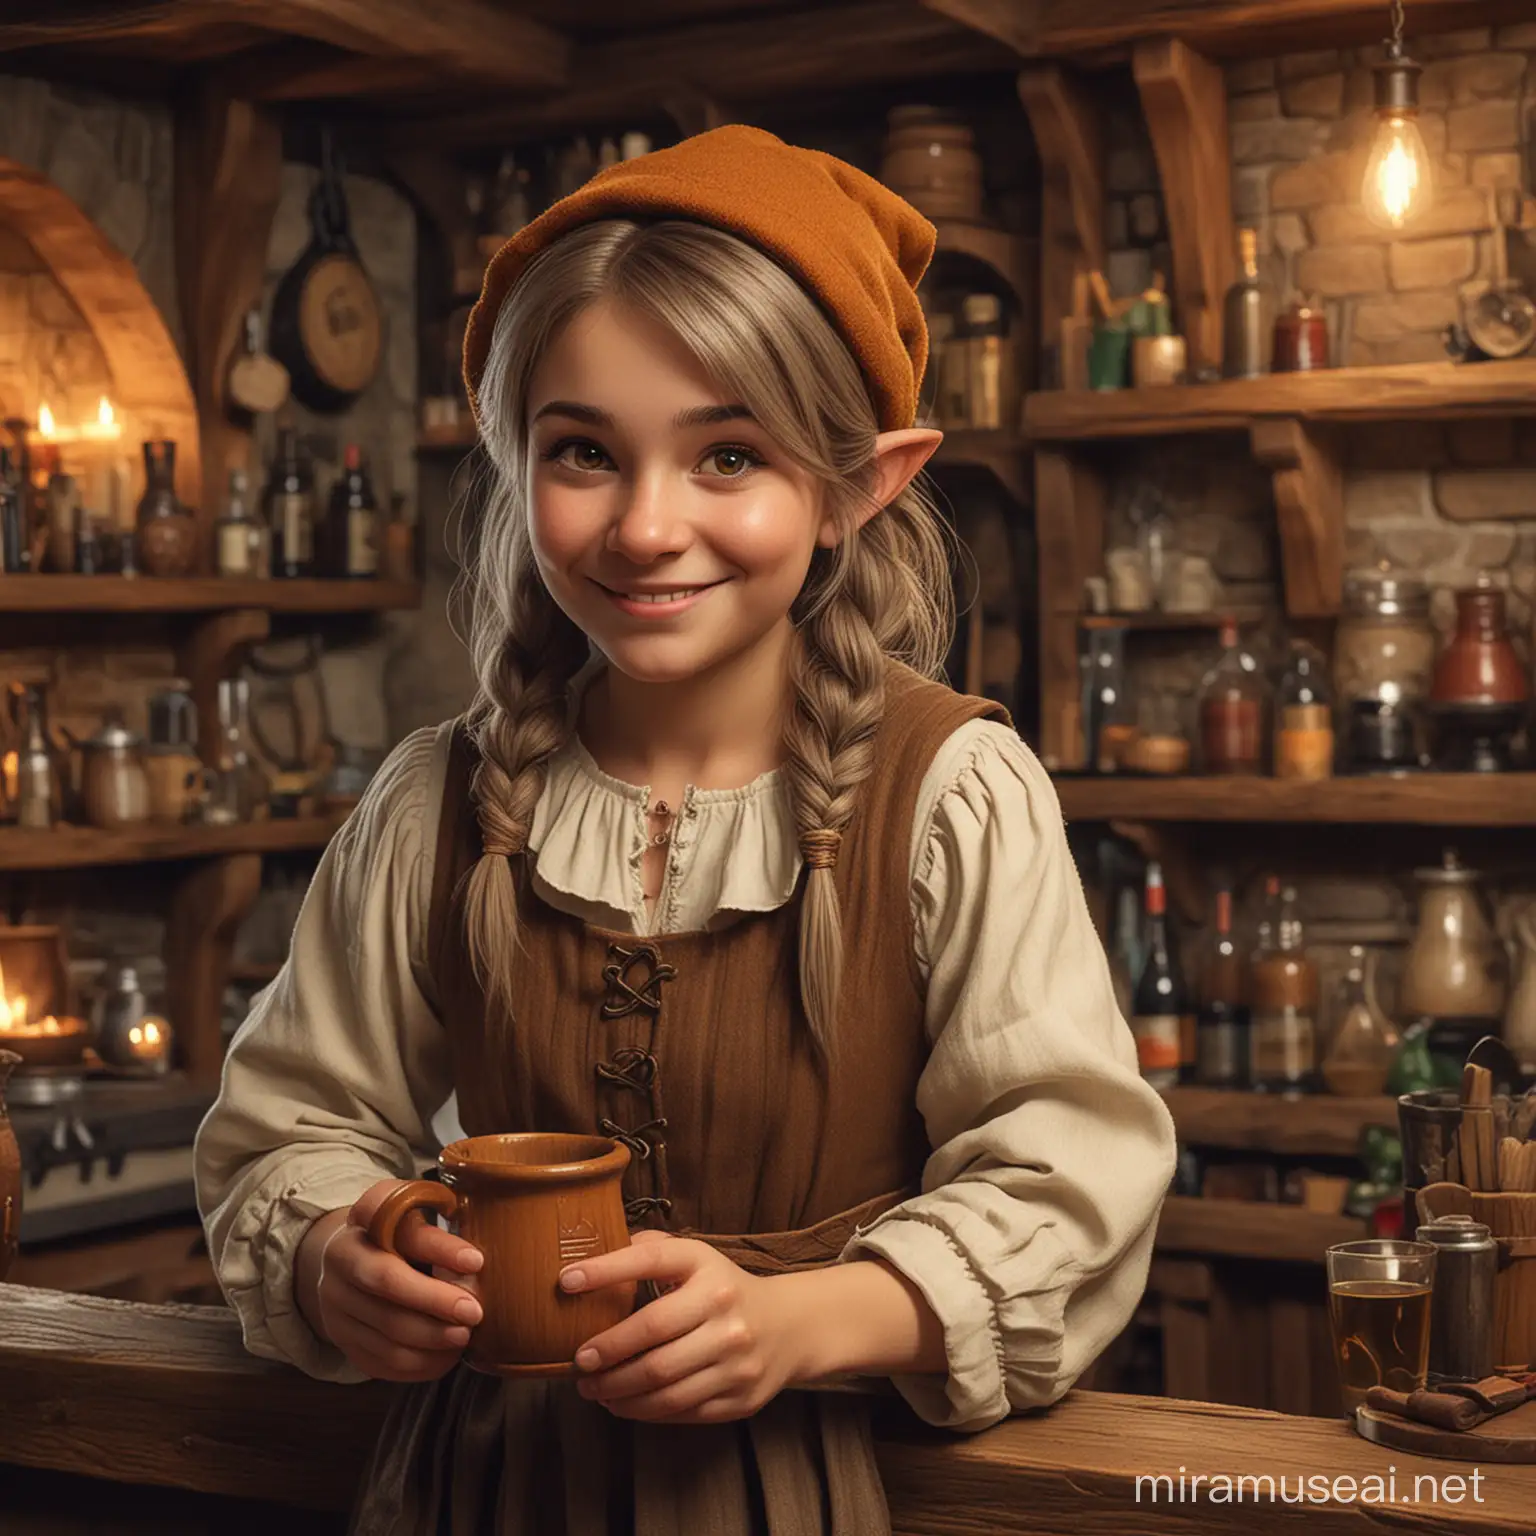 Subject: The central character is a Halfling gnome innkeeper. He is characterized by his distinctive large round ears, warm smile, and golden brown eyes. His welcoming demeanor sets the tone for the image, creating a sense of hospitality and friendliness.
Setting: The scene takes place in an inn, suggesting a cozy and inviting atmosphere. The inn's interior may include rustic furnishings, wooden elements, and warm lighting to enhance the ambiance.
Background: The background could feature other patrons enjoying themselves, adding a social and lively aspect to the image. Additionally, subtle details like shelves with various ale mugs or a fireplace may contribute to the overall charm of the setting.
Style/Coloring: The artistic style leans towards fantasy, capturing the magical essence of a gnome character. Warm and earthy tones dominate the color palette, emphasizing the welcoming nature of the inn.
Action: The Halfling gnome innkeeper is depicted offering a wooden mug of ale, showcasing her role in providing hospitality and serving guests.
Items: Key items include the wooden mug of ale, possibly with frothy bubbles, and the brown worn coat on the innkeeper, adding a touch of color to the composition.
Costume/Appearance: The innkeeper's attire consists of a brown cloths, contributing to the fantasy theme. Attention is drawn to her round ears, warm smile, and golden brown eyes, highlighting her amiable character.
Accessories: The wooden mug of ale serves as both a prop and an accessory, emphasizing the innkeeper's role and enhancing the overall visual narrative.